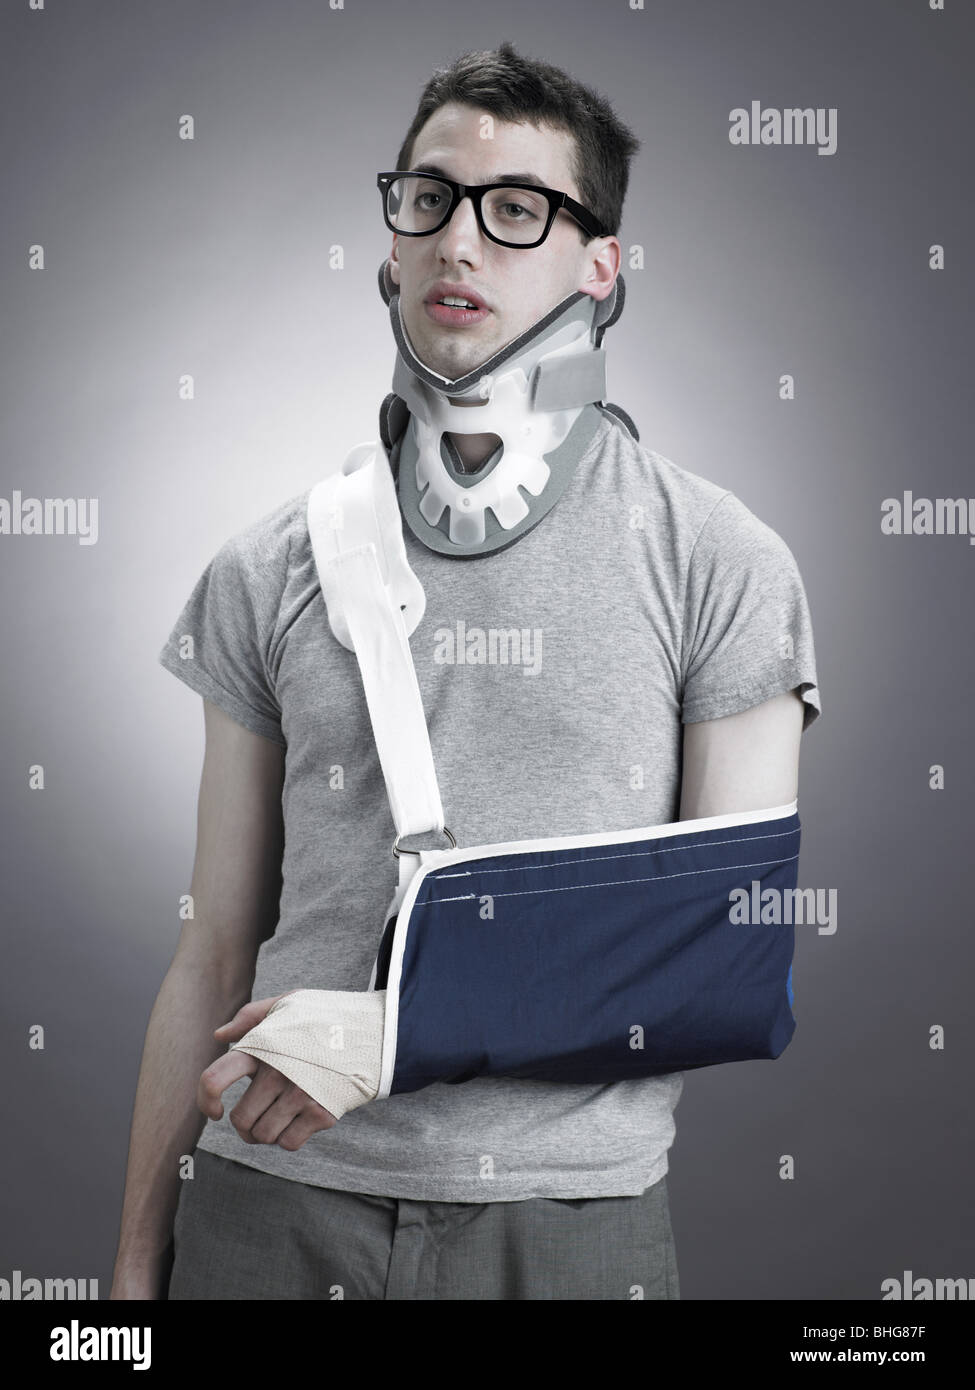 Man with neck brace and arm in sling Stock Photo